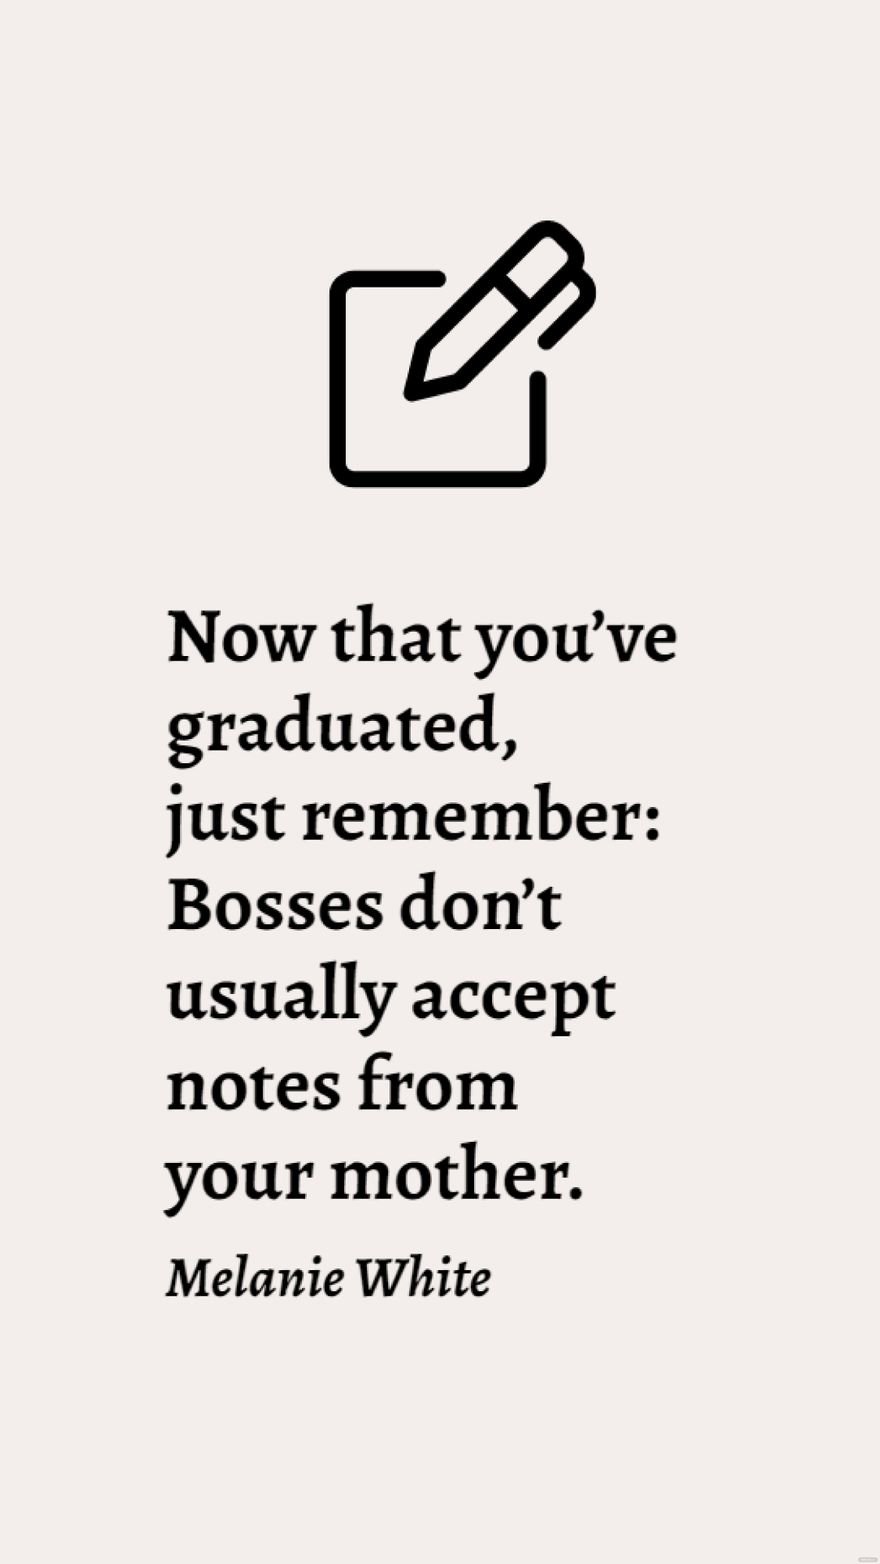 Free Melanie White - Now that you’ve graduated, just remember: Bosses don’t usually accept notes from your mother. in JPG